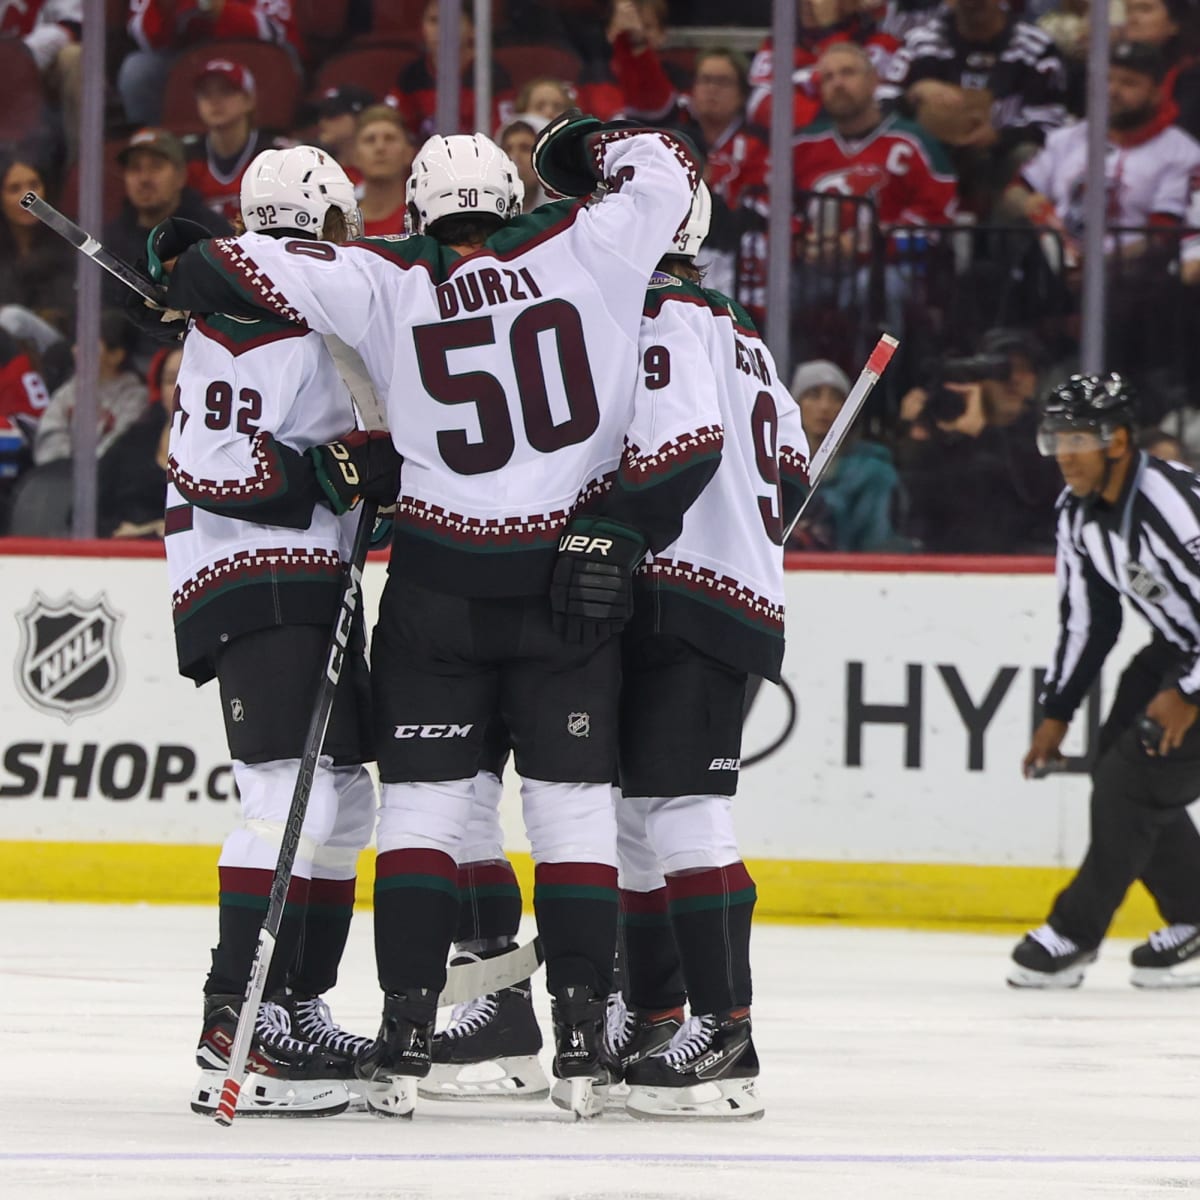 Vejmelka stops 32 shots in NHL debut, but Coyotes lose 2-1 in shootout